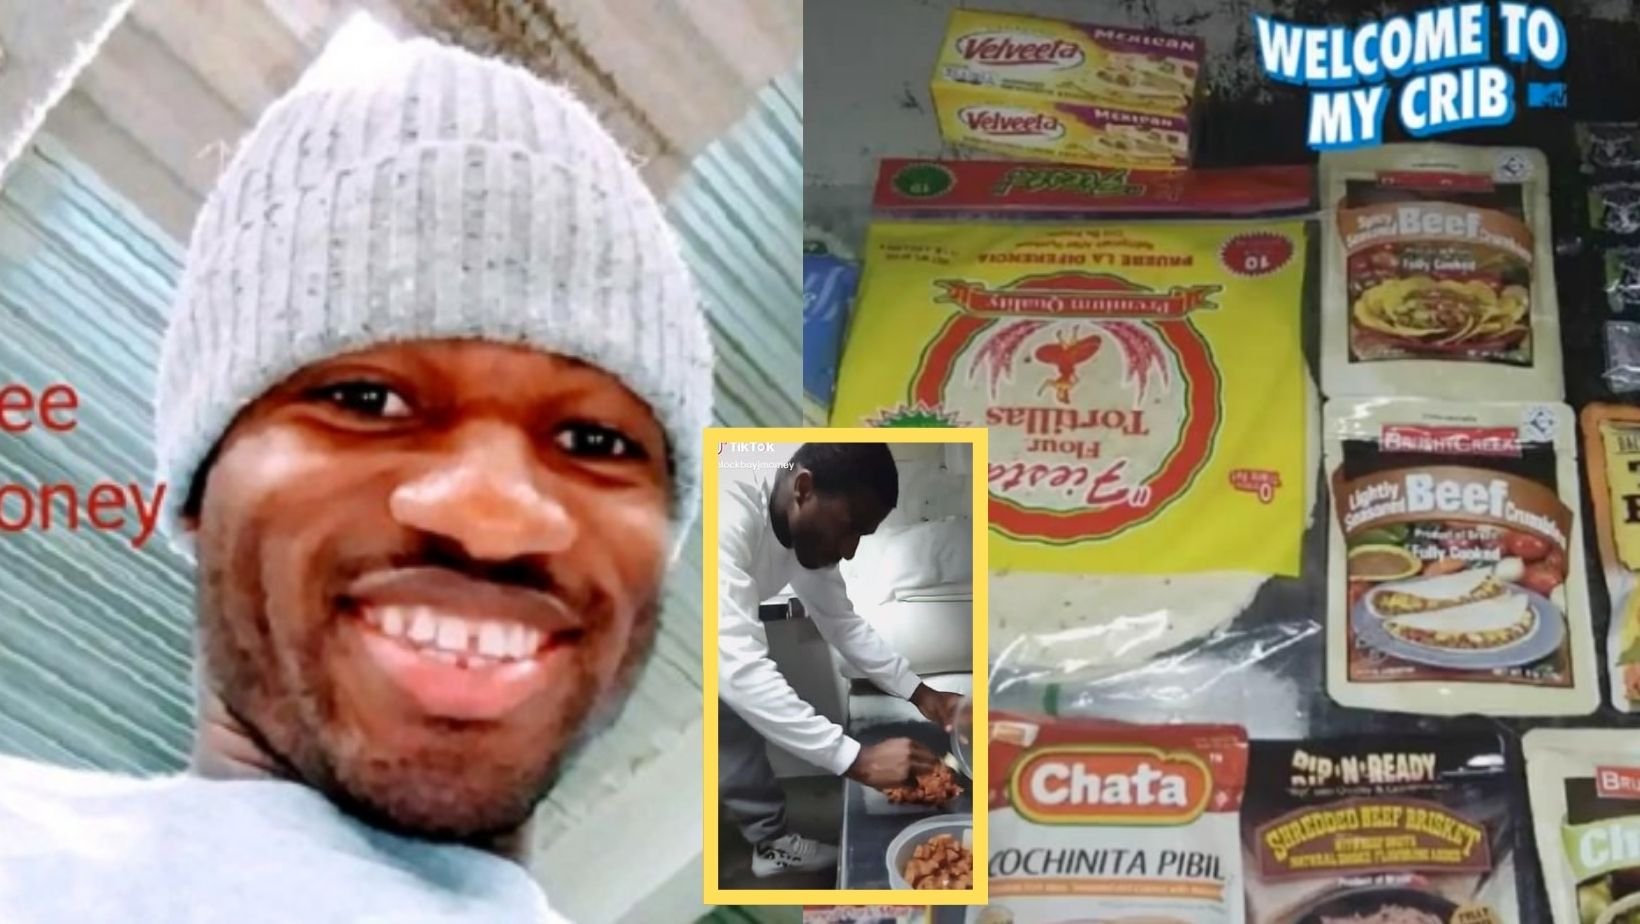 1 37.jpg?resize=1200,630 - Inmate Went Viral After Launching His Own TikTok Cooking Show While Serving Time In Prison